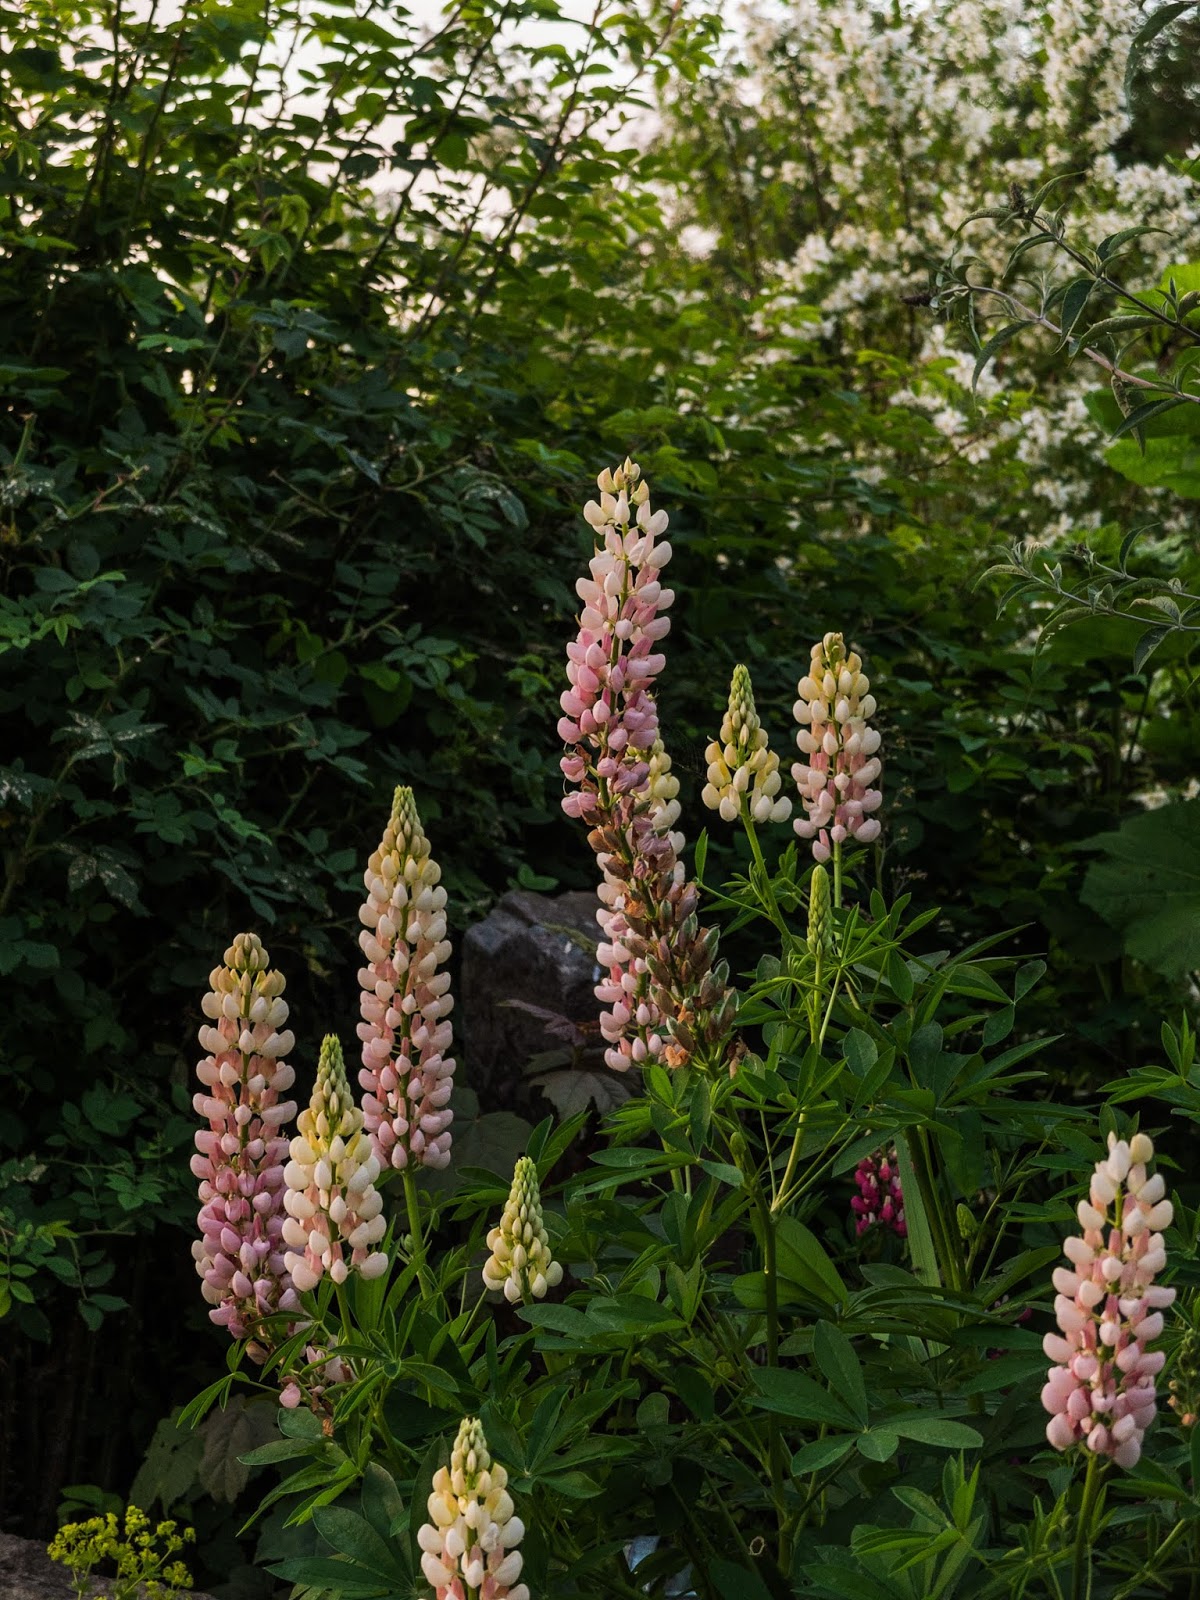 Light pink lupine flowers with a rose bush behind them.